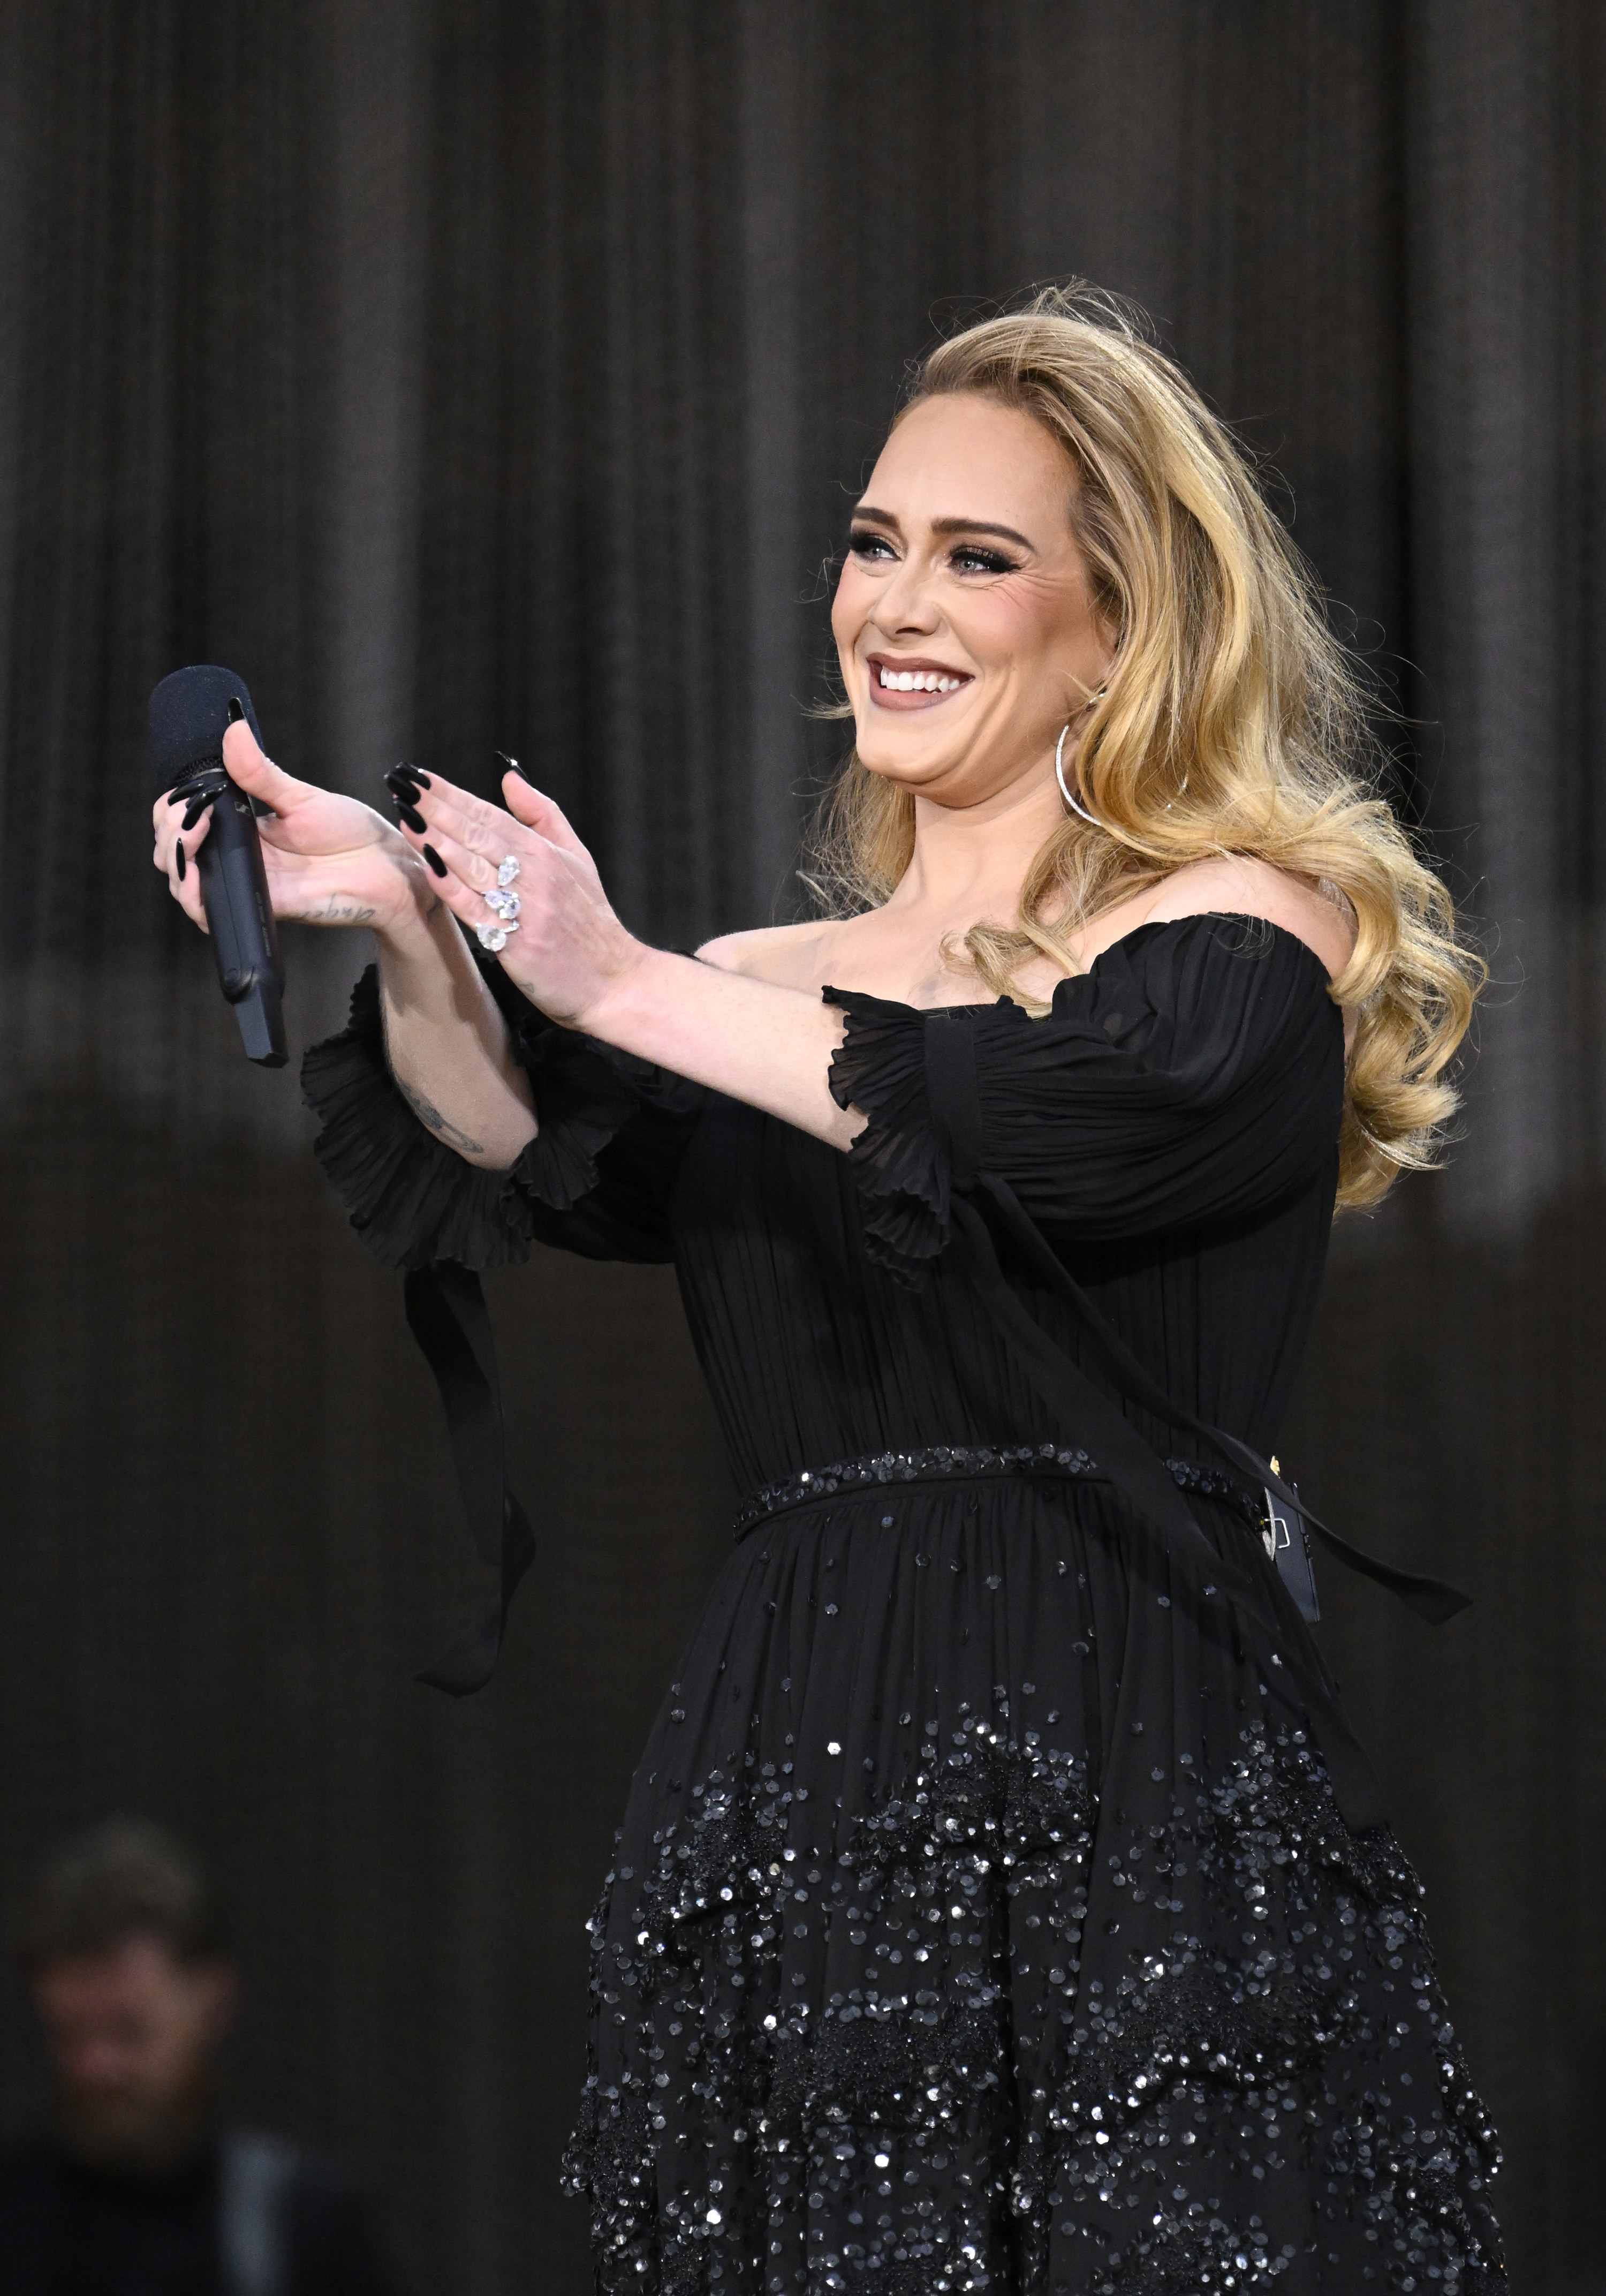 adele clapping